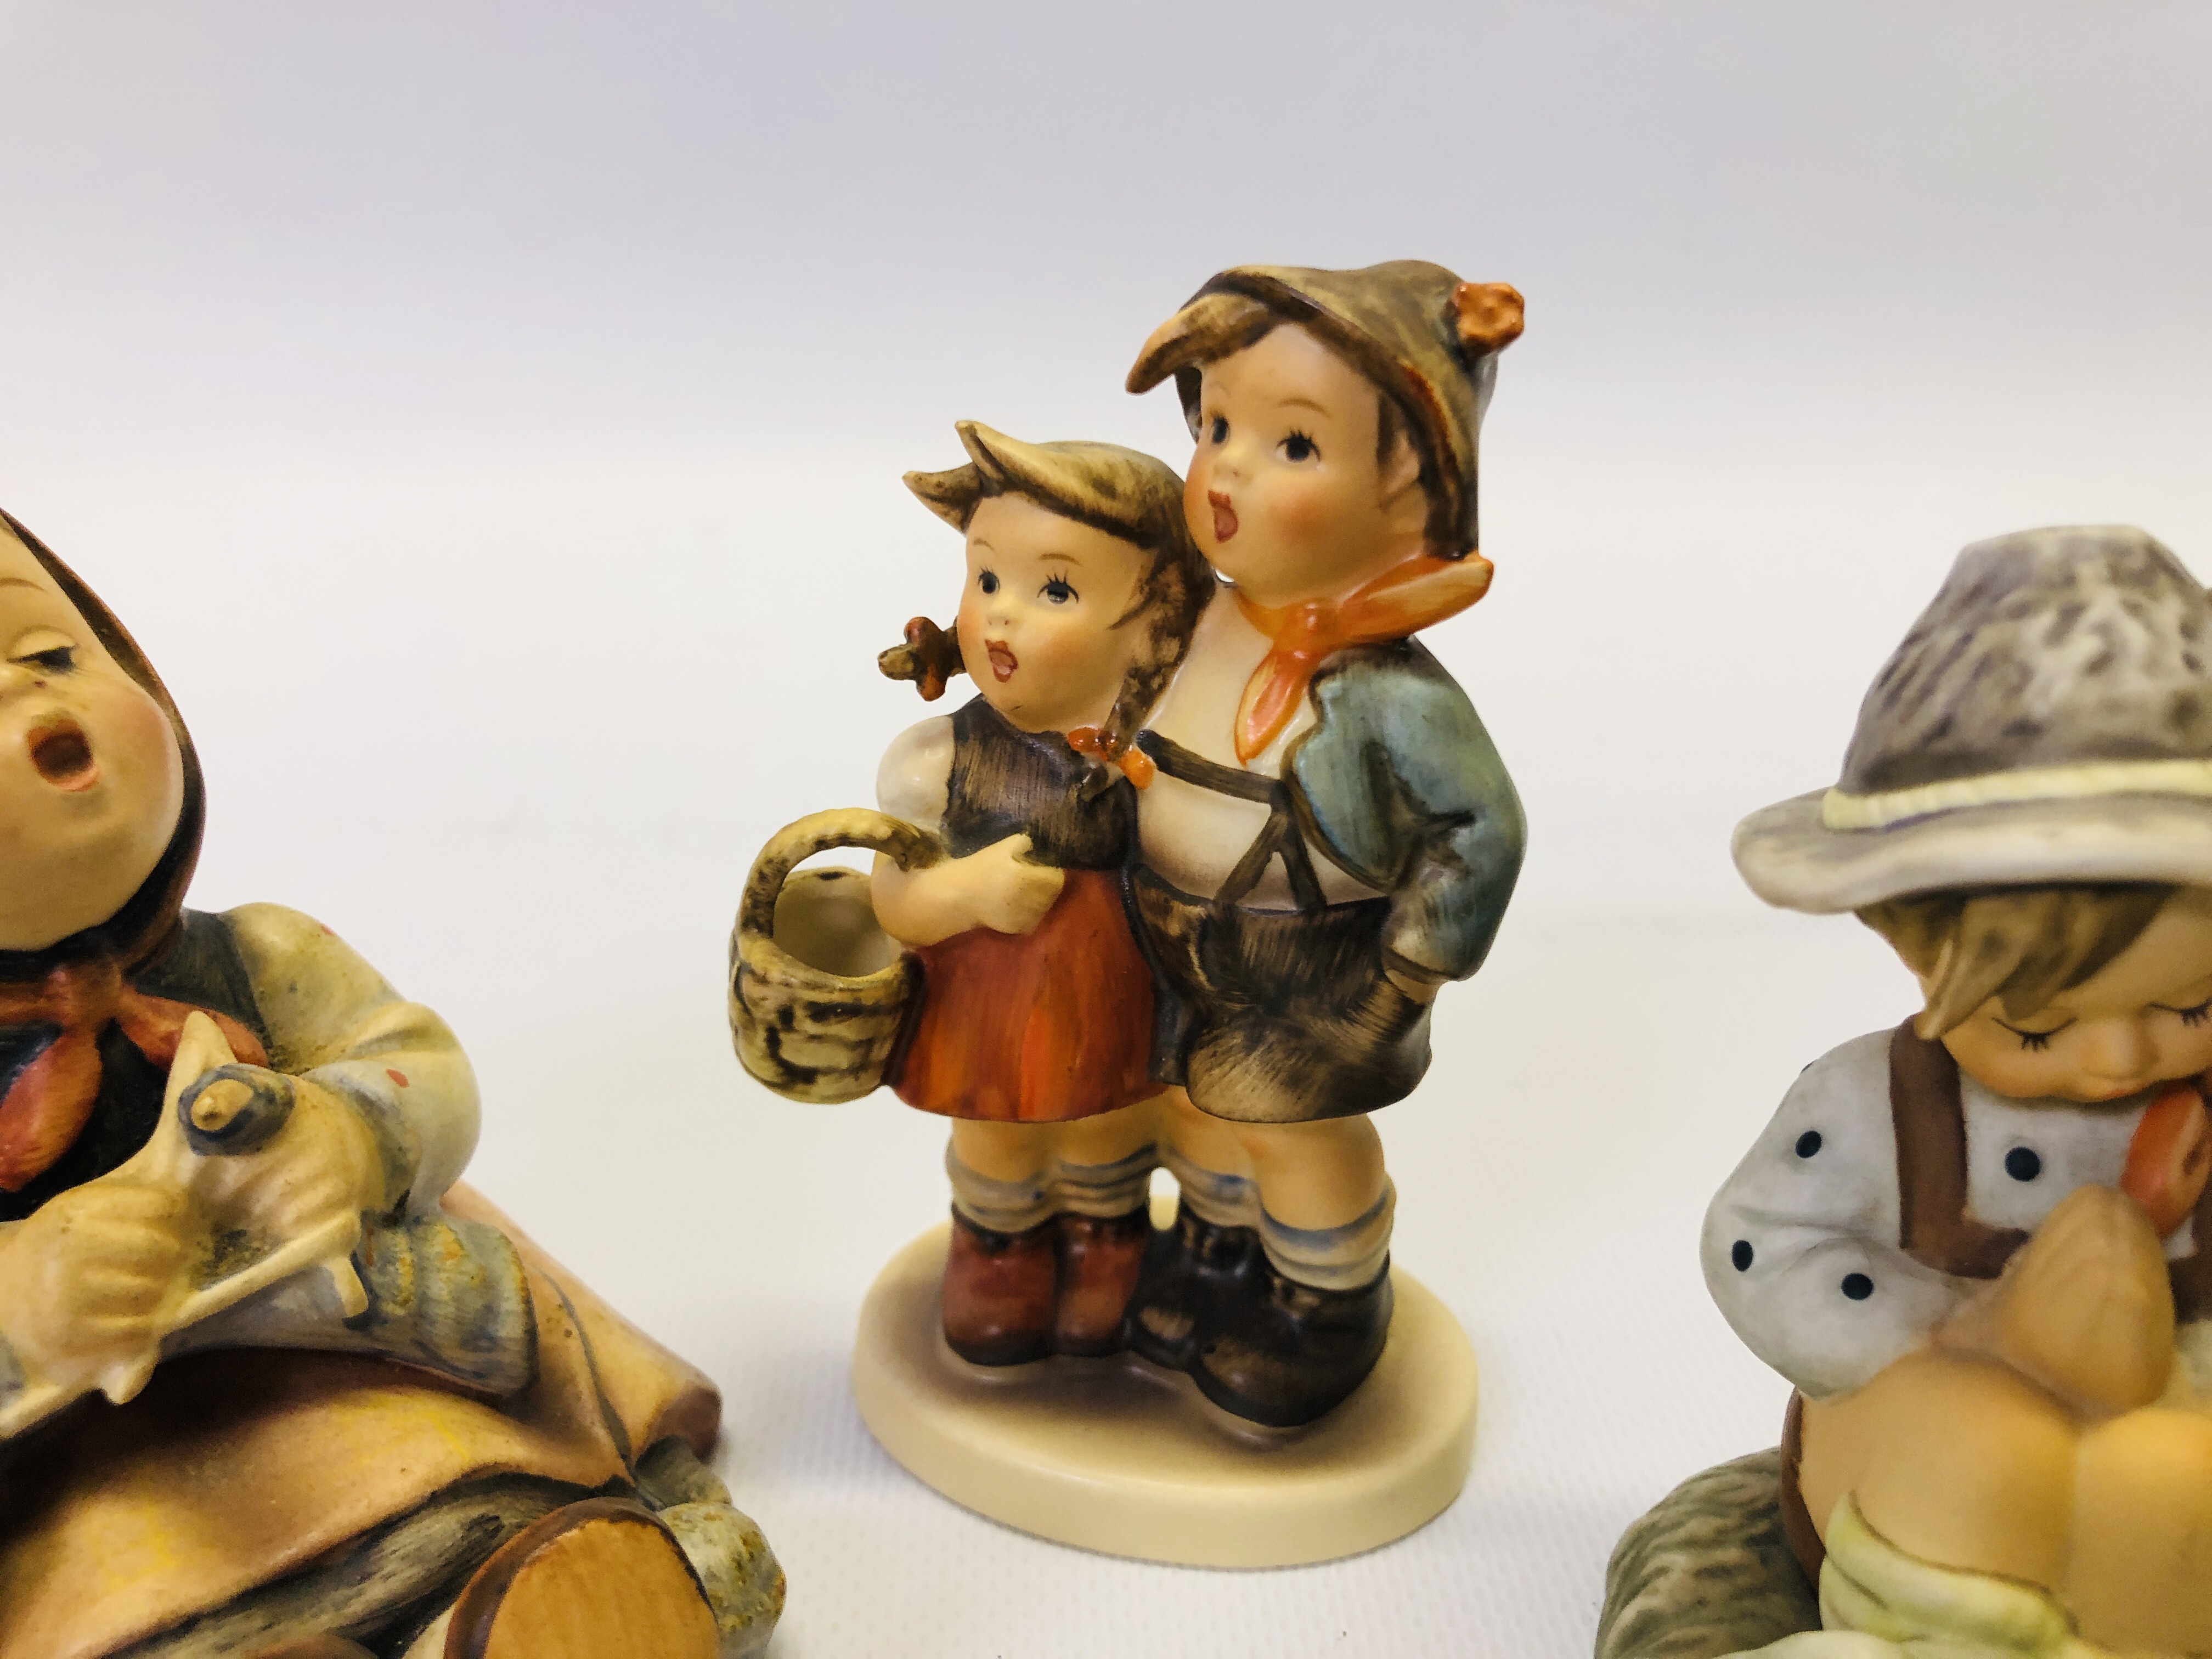 A GROUP OF 6 ASSORTED "GOEBEL" CABINET ORNAMENTS T O INCLUDE "LITTLE HELPER" NATURES PRAYER BH55 - Image 4 of 10